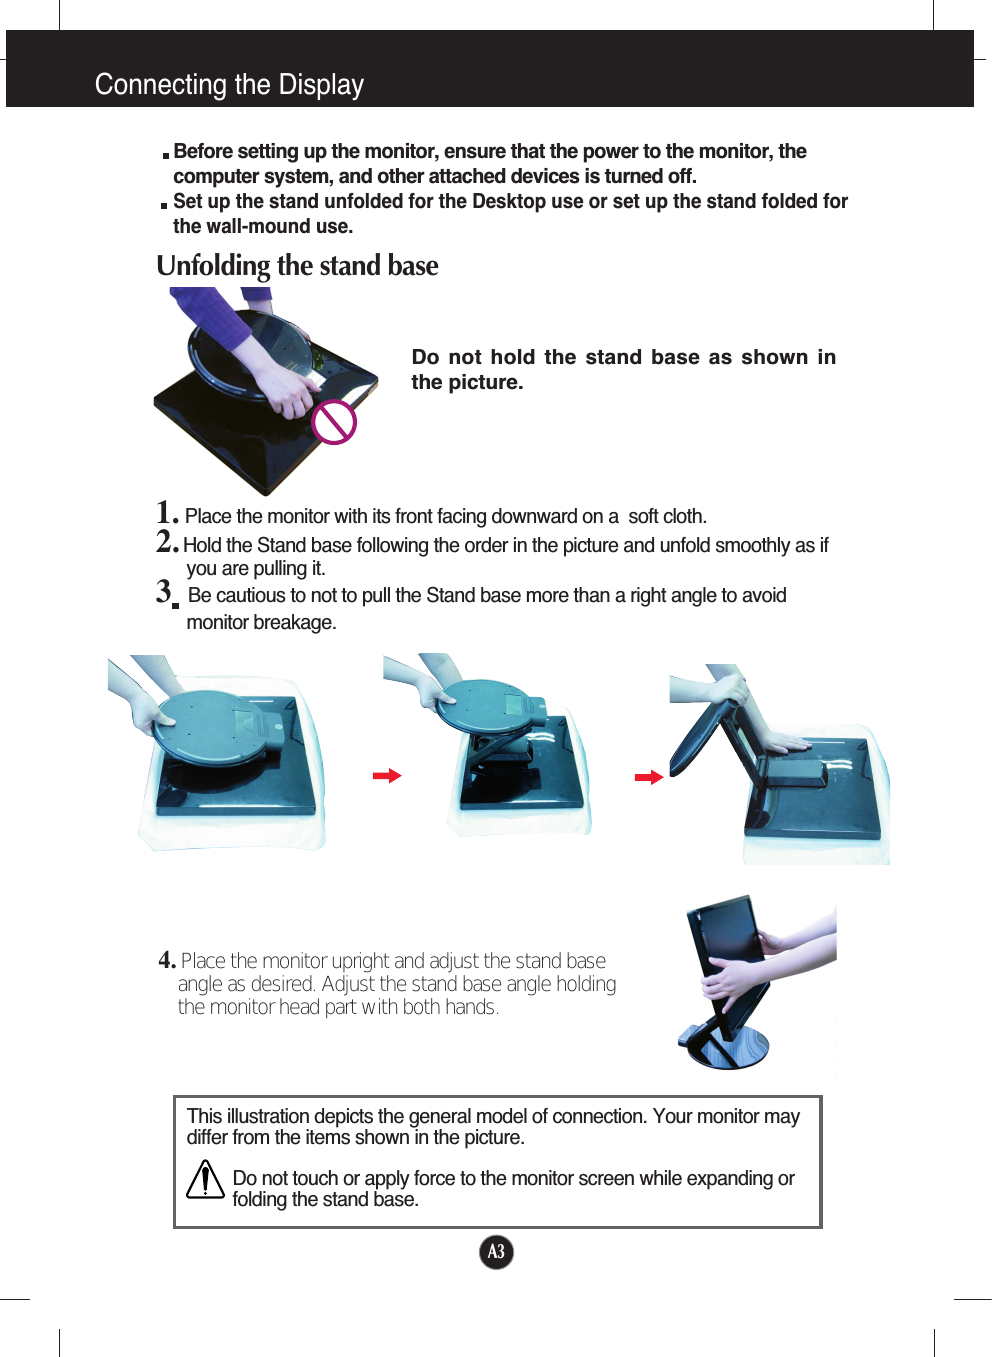 Connecting the DisplayA34. Place the monitor upright and adjust the stand baseangle as desired. Adjust the stand base angle holdingthe monitor head part with both hands.This illustration depicts the general model of connection. Your monitor maydiffer from the items shown in the picture.Do not touch or apply force to the monitor screen while expanding orfolding the stand base.Before setting up the monitor, ensure that the power to the monitor, thecomputer system, and other attached devices is turned off. Set up the stand unfolded for the Desktop use or set up the stand folded forthe wall-mound use.Unfolding the stand base1. Place the monitor with its front facing downward on a  soft cloth.2. Hold the Stand base following the order in the picture and unfold smoothly as ifyou are pulling it.3Be cautious to not to pull the Stand base more than a right angle to avoidmonitor breakage. Do  not  hold  the  stand  base  as  shown  inthe picture.